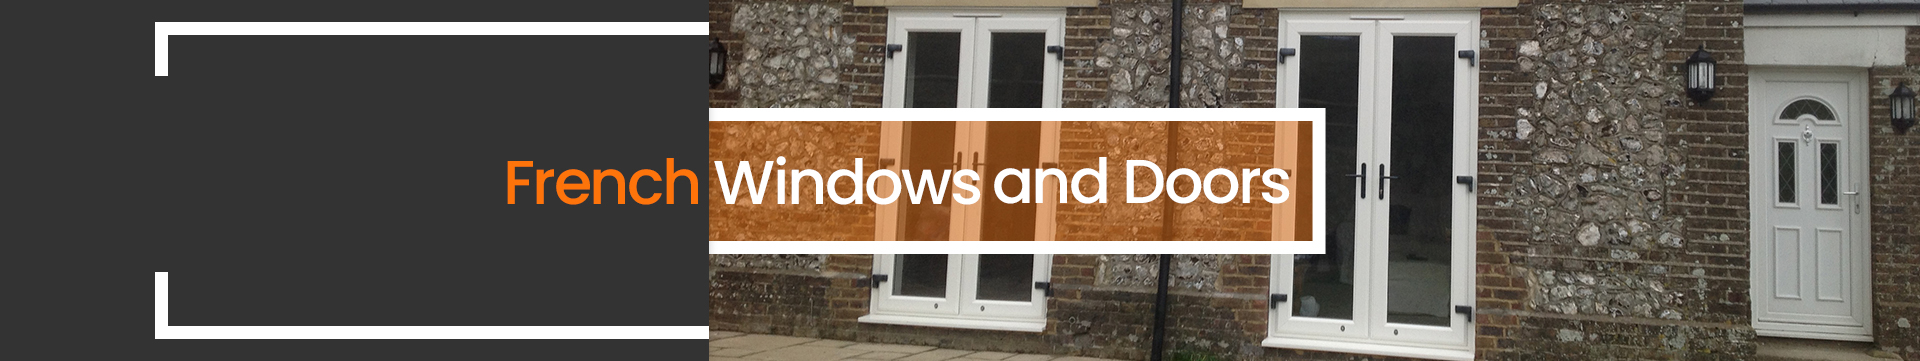 French windows and doors banner